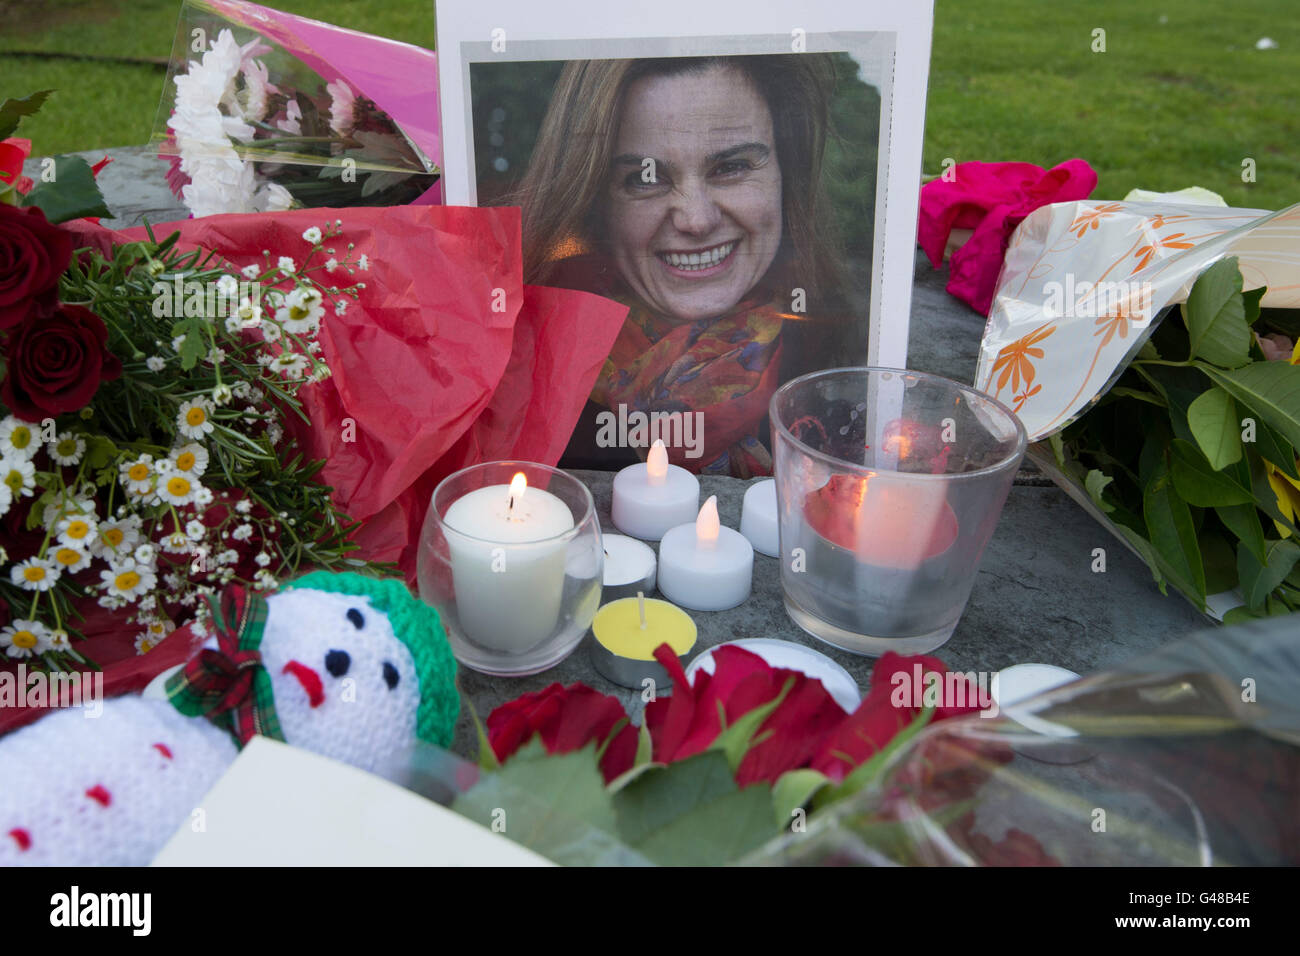 Floral tributes for Labour MP Jo Cox who was killed after being shot while in her constituency Batley and Spen. Stock Photo